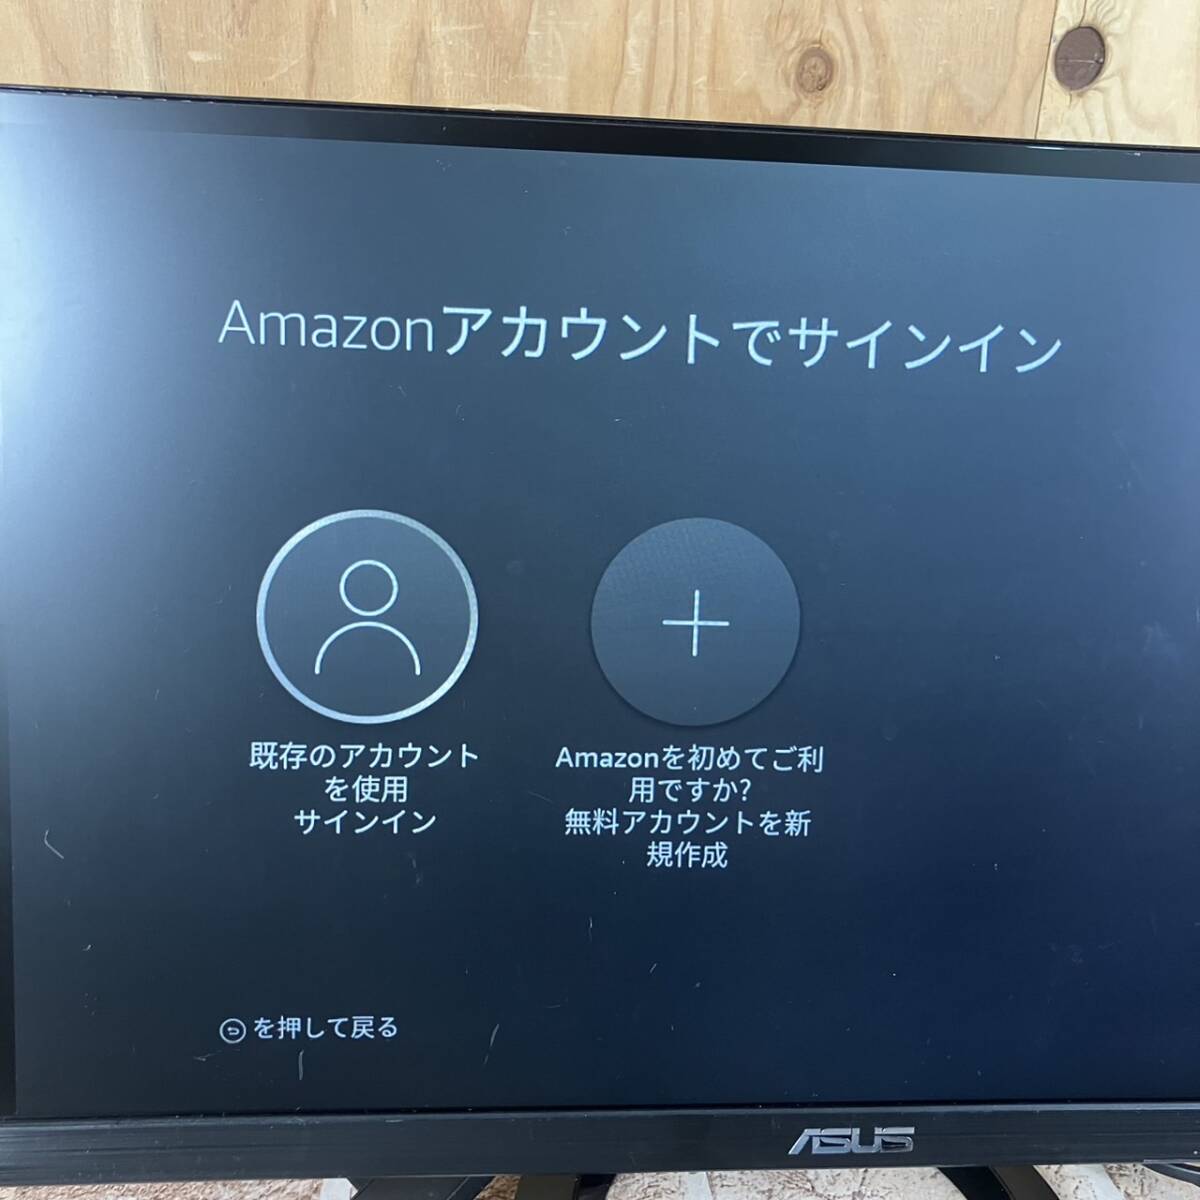 [5-212] Amazon /Amazon Fire TV Stick no. 2 generation /2017 year sale model voice recognition remote control attaching .LY73PR[ uniform carriage 297 jpy ]